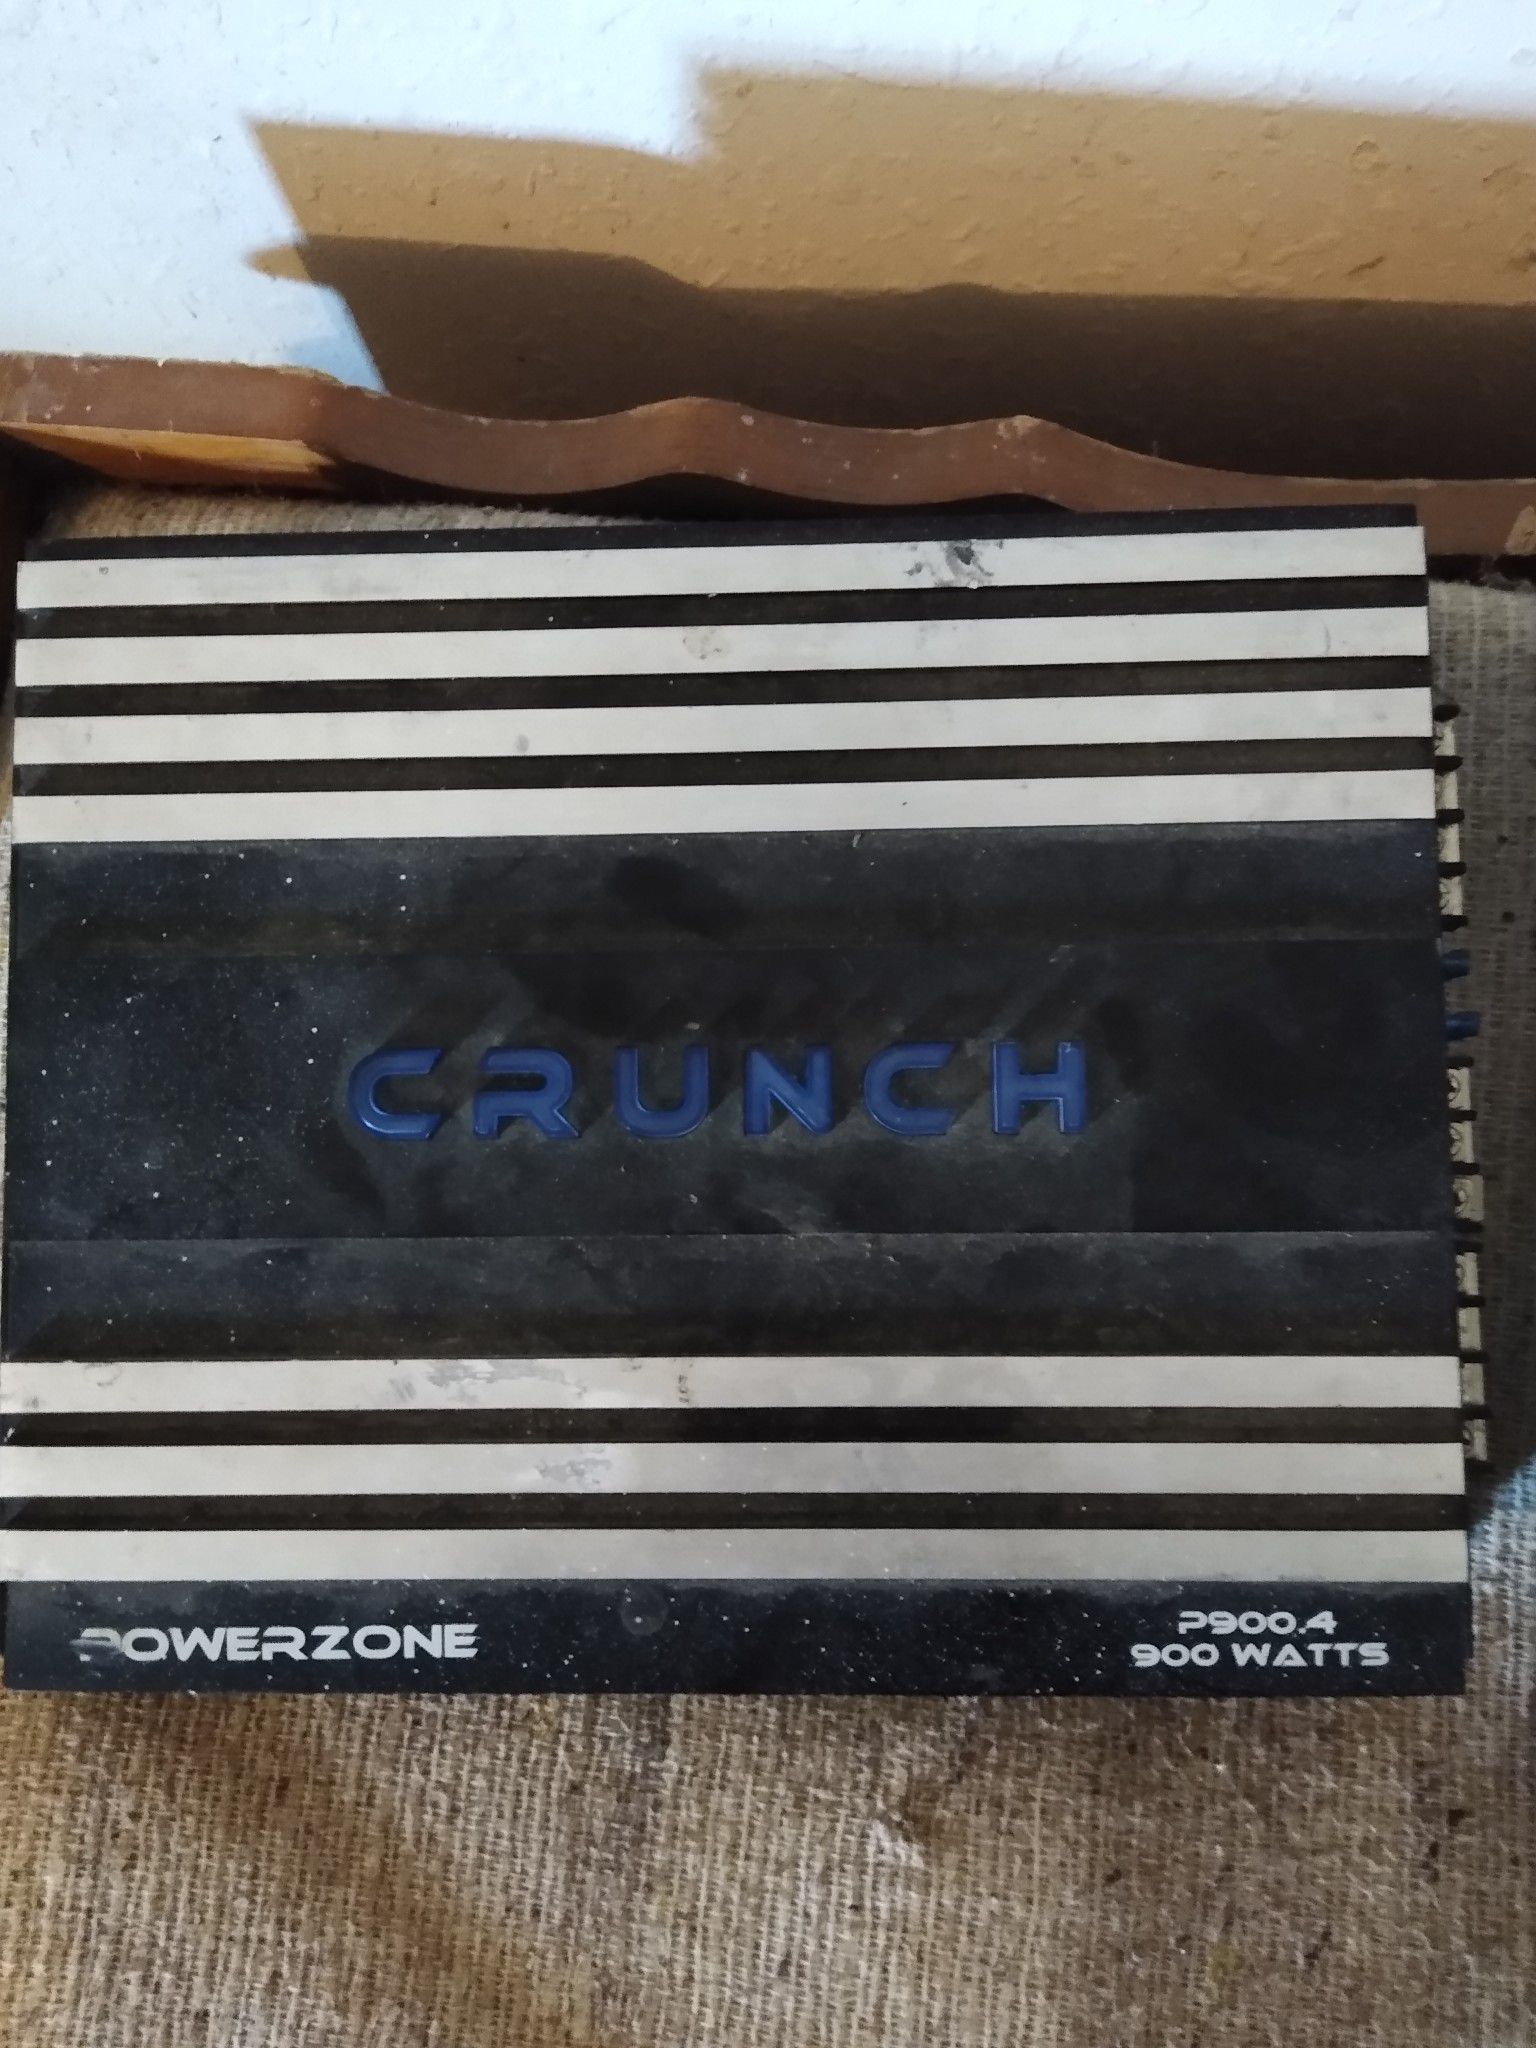 3 amps crunch,Rockford and Jensen power